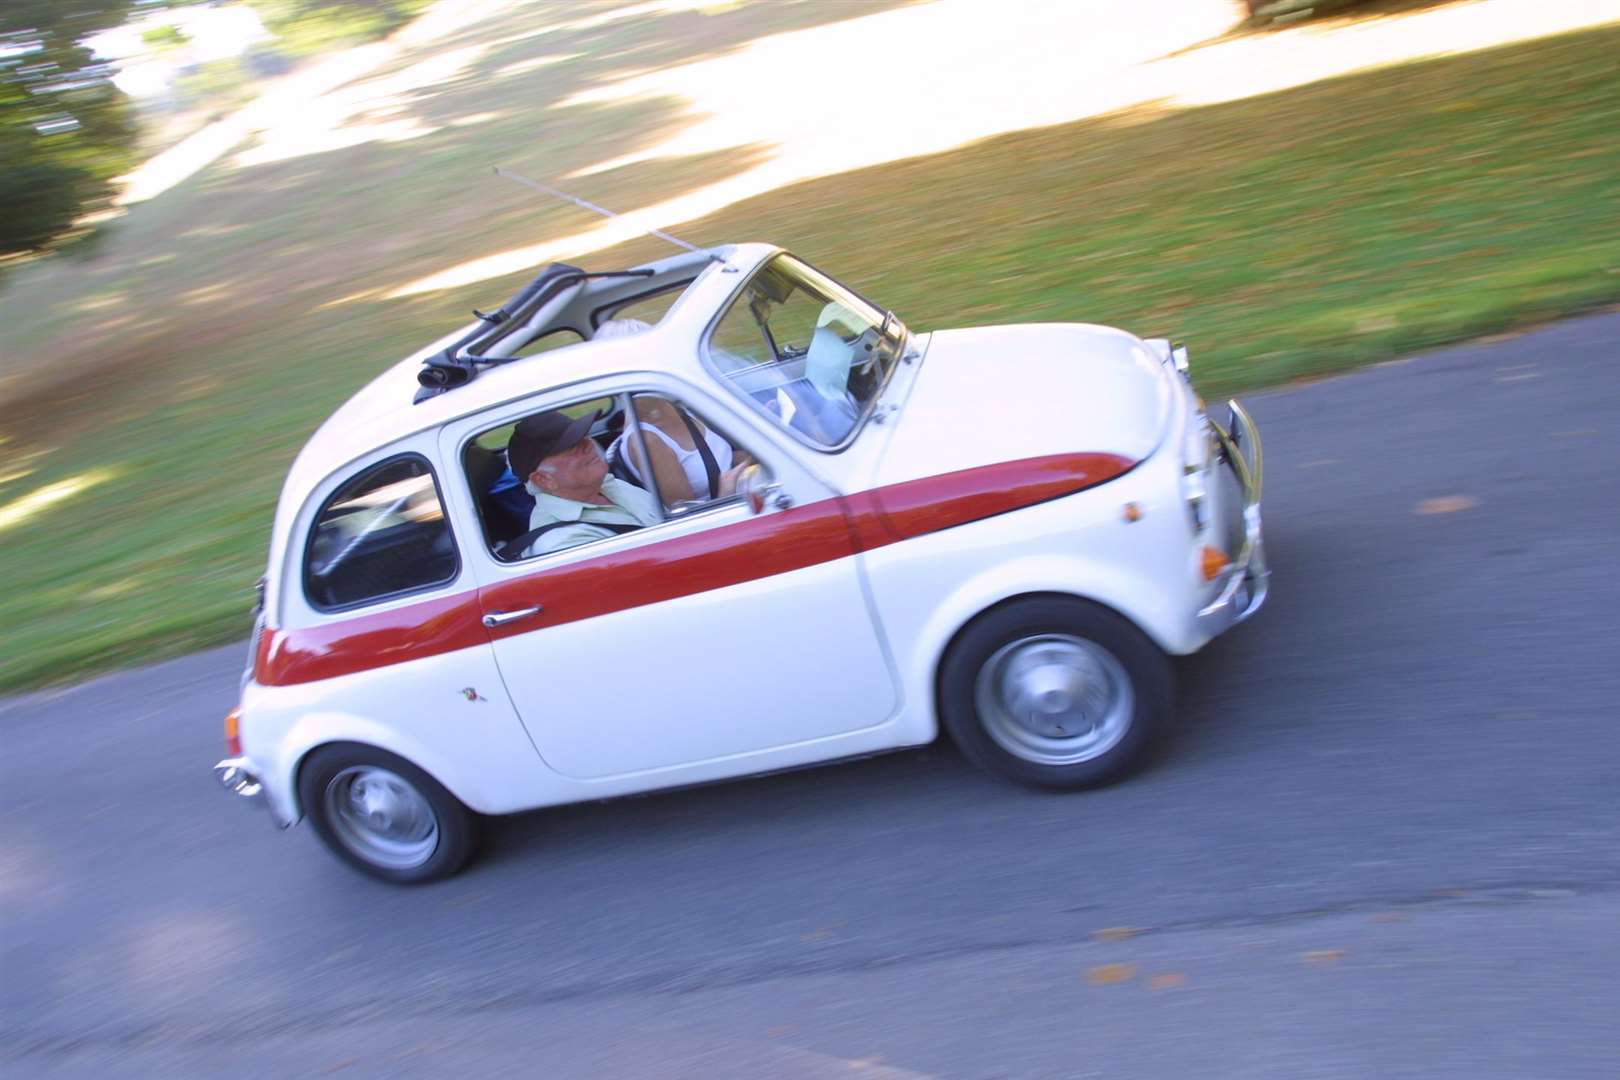 A new Fiat 500 cost less than £500 in 1970